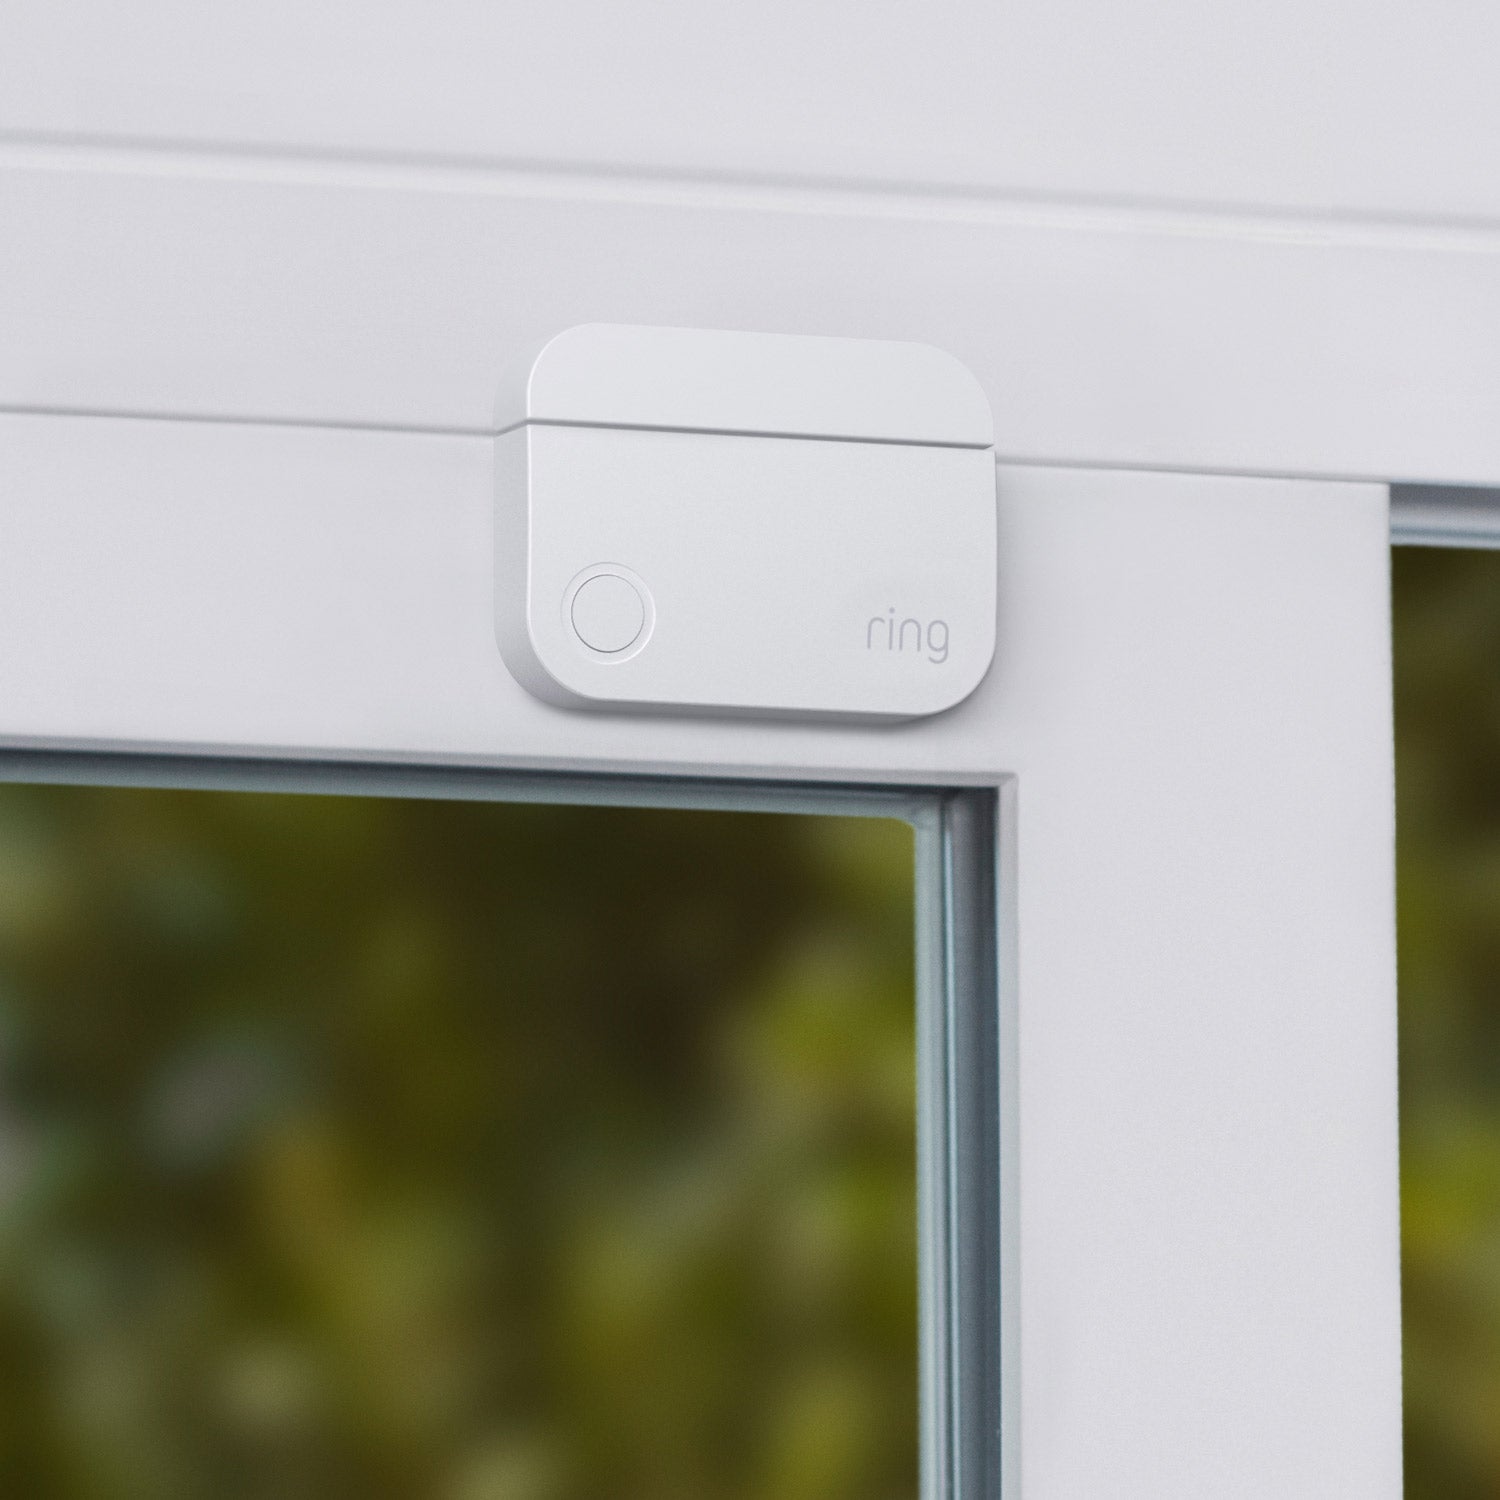 Alarm Pro Security Kit, 8-Piece (with built-in eero Wi-Fi 6 router) - Close-up of Door Contact Sensor for Alarm Pro Security Kit mounted to top frame of white door.